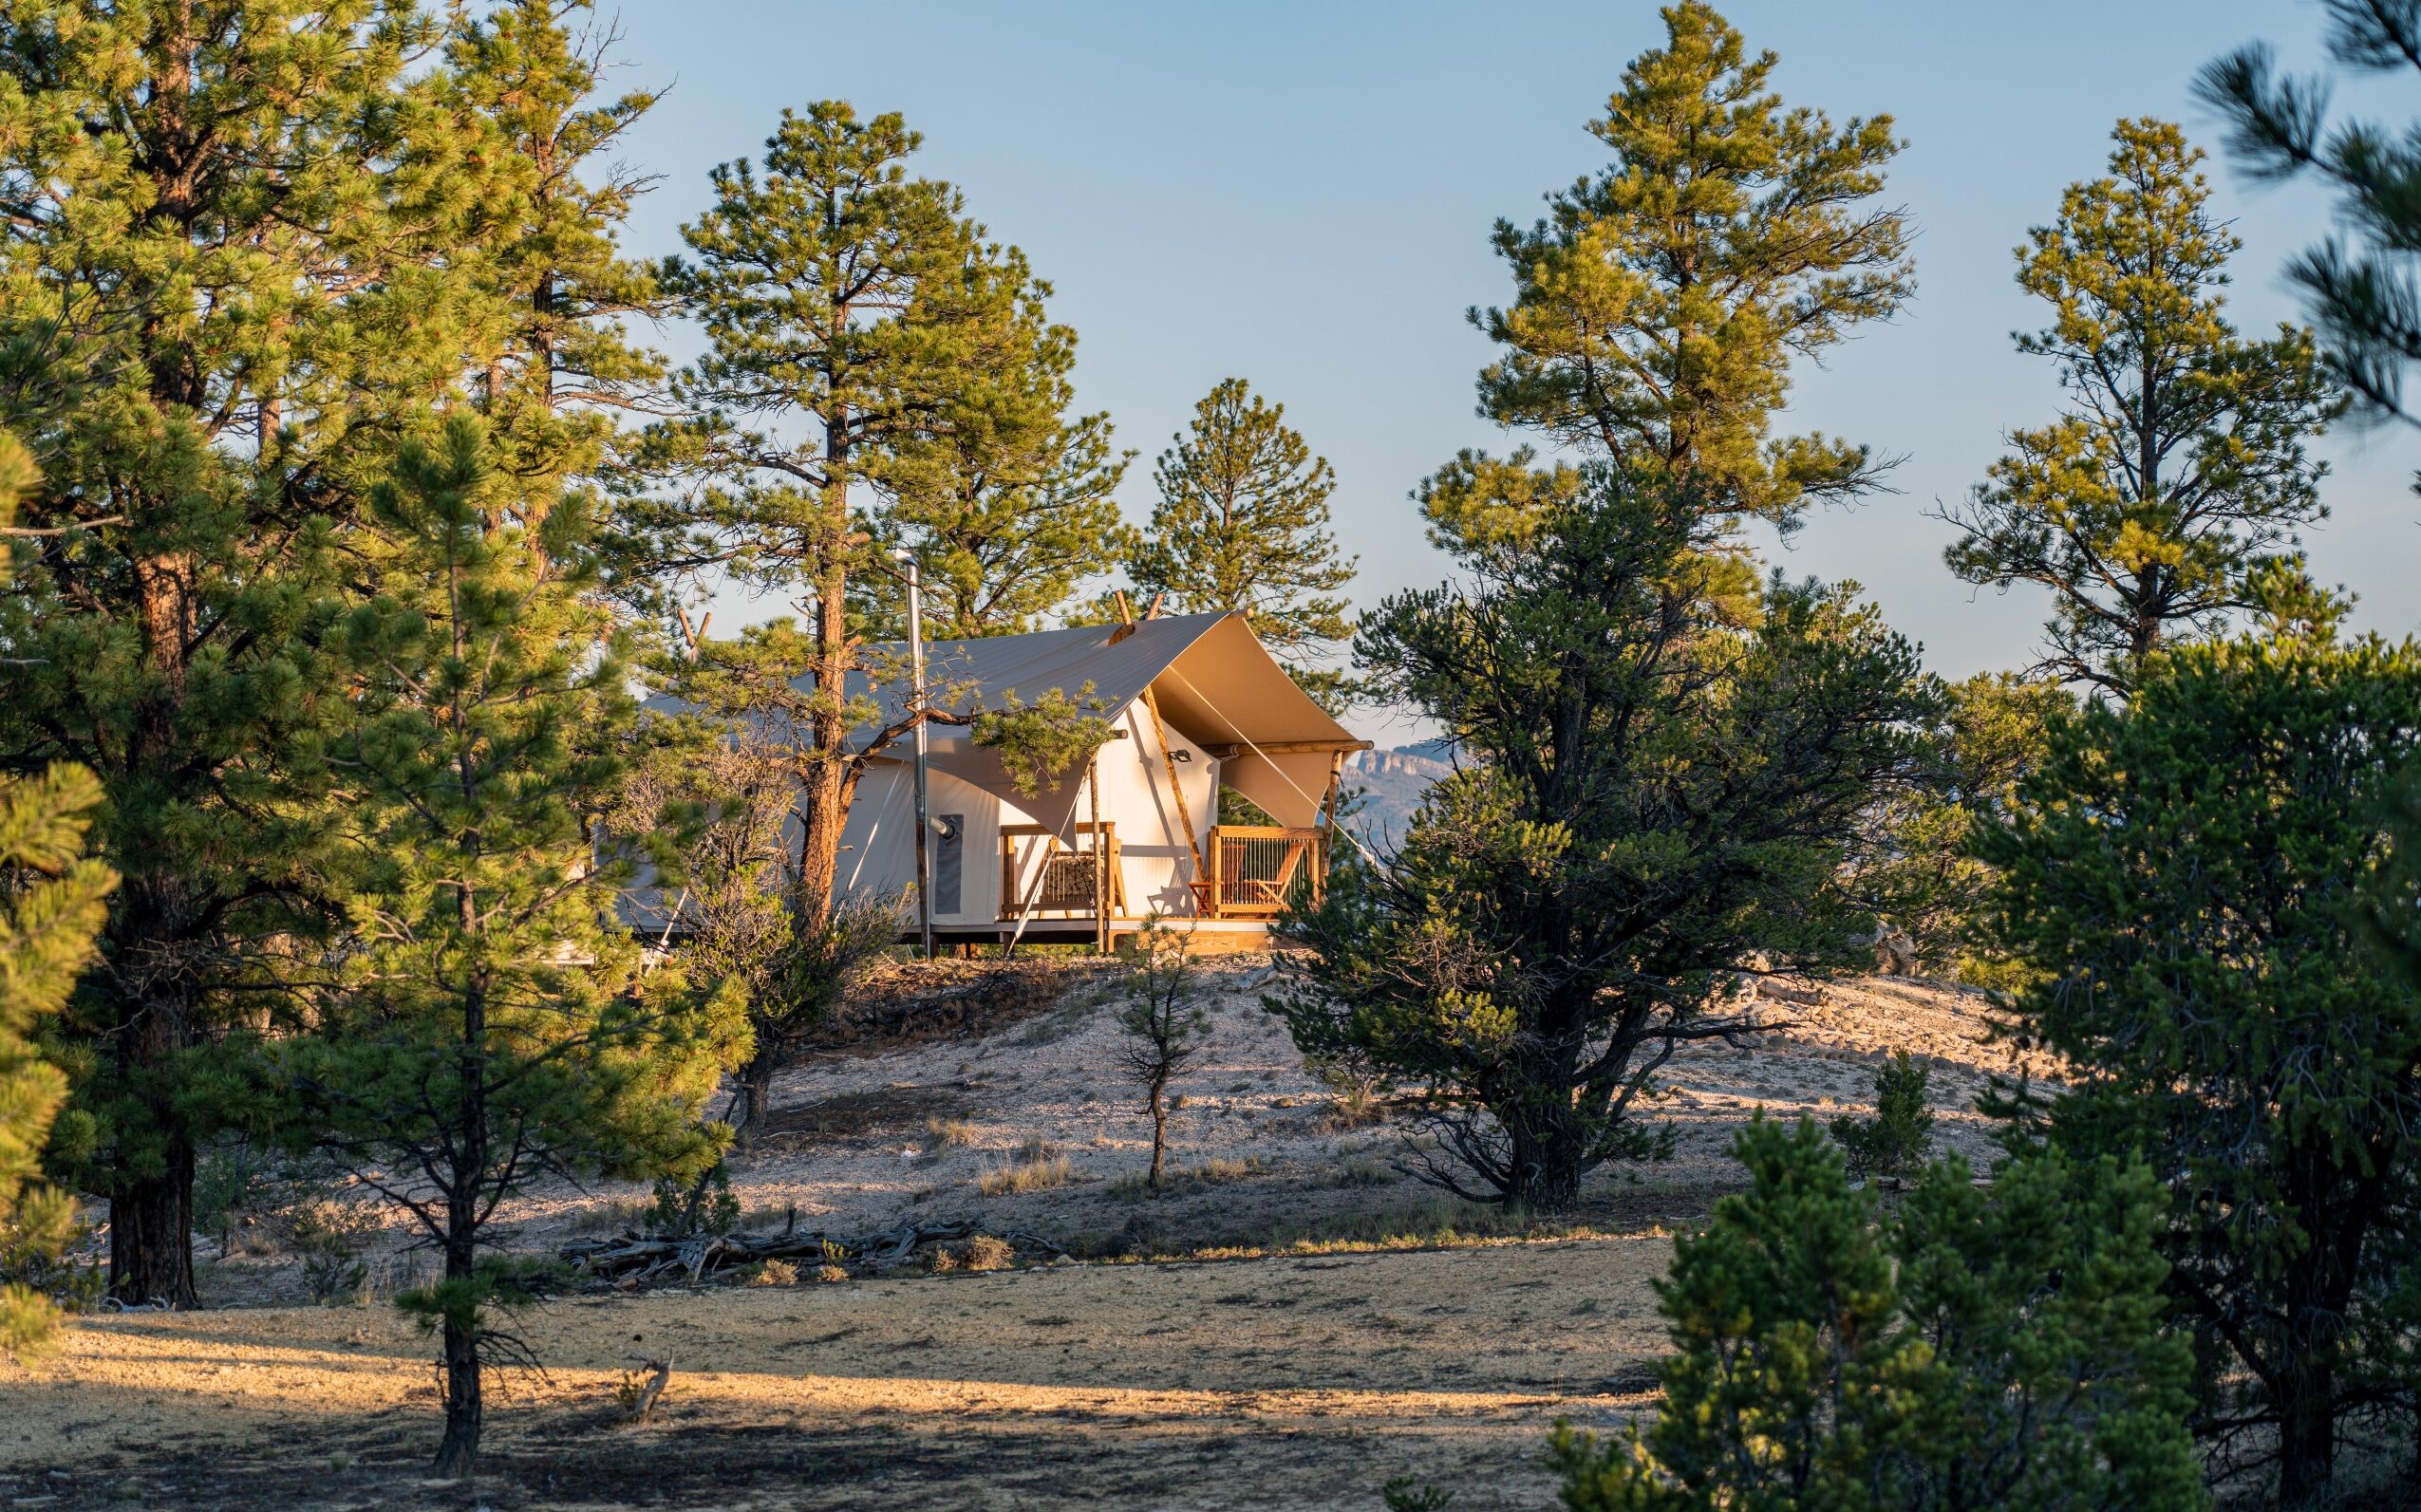 This Is the Best Off-the-Grid Glamping Experience in Bryce Canyon National Park